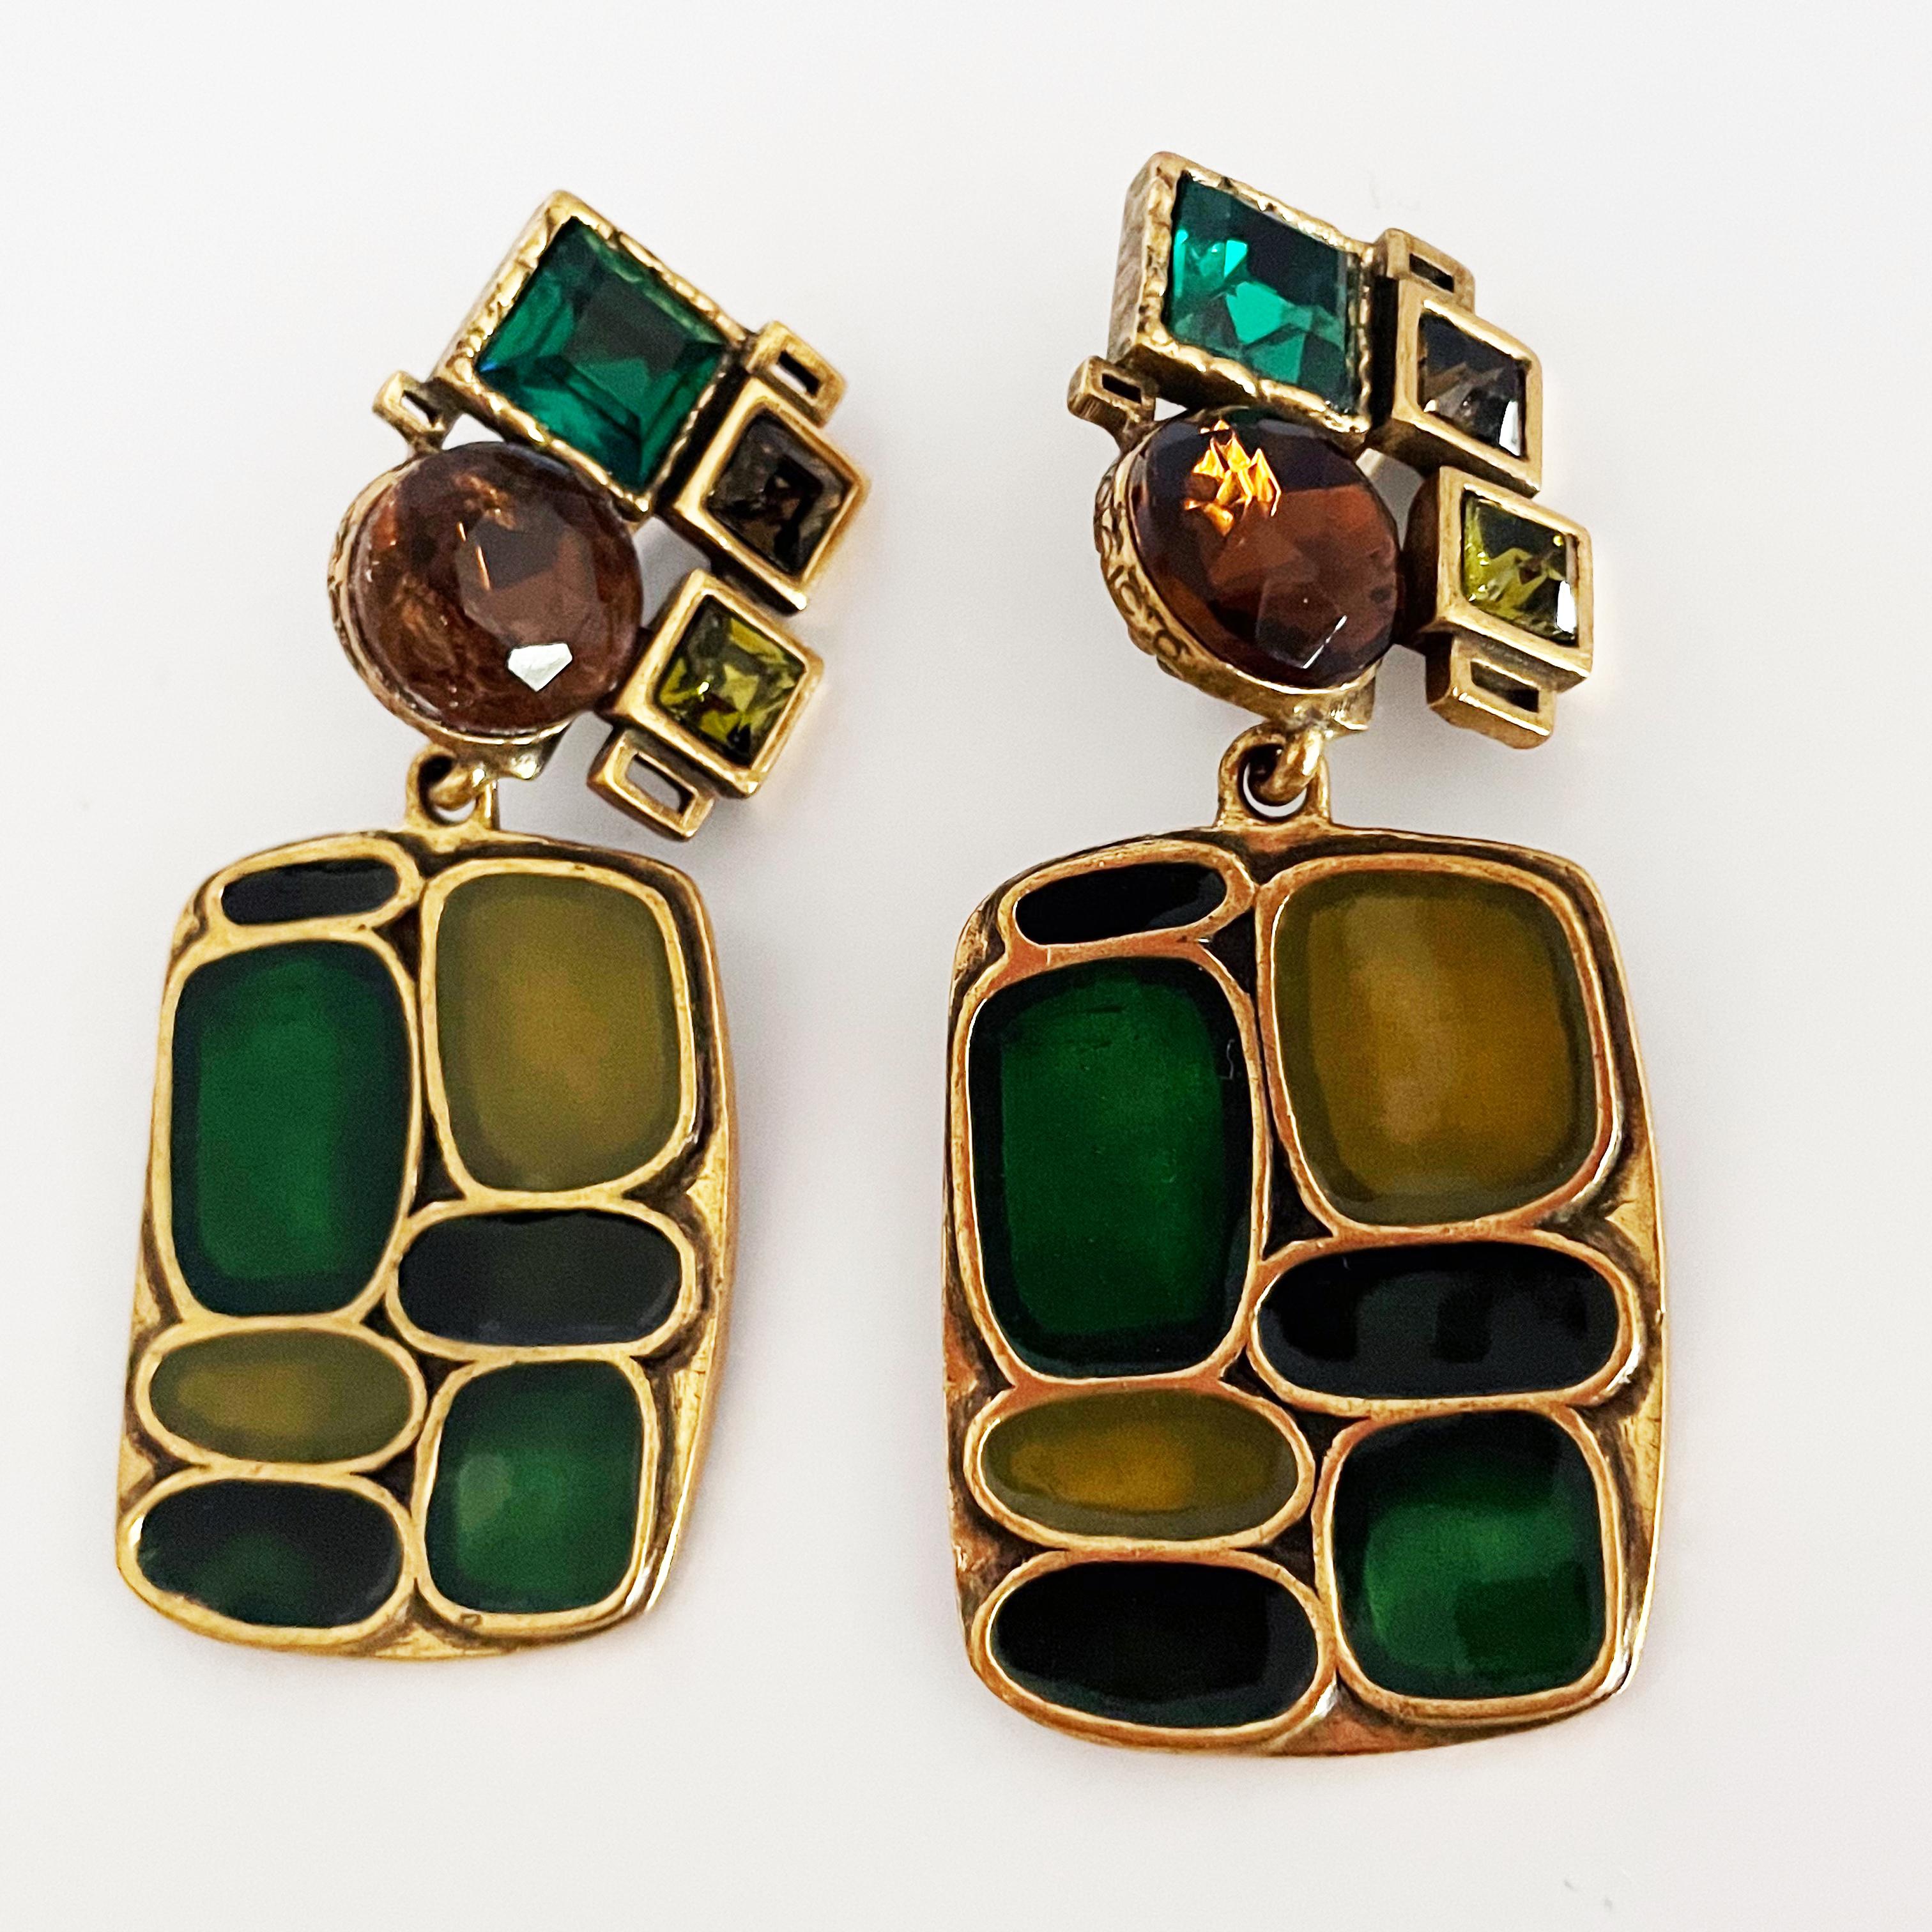 Oscar de la Renta modernist dangle earrings, most likely made in the 1980s.  Made from brass-hued metal, they feature  modernist shapes and crystals in shades of lime, emerald and topaz.  

These fabulous designer earrings are made to elevate your